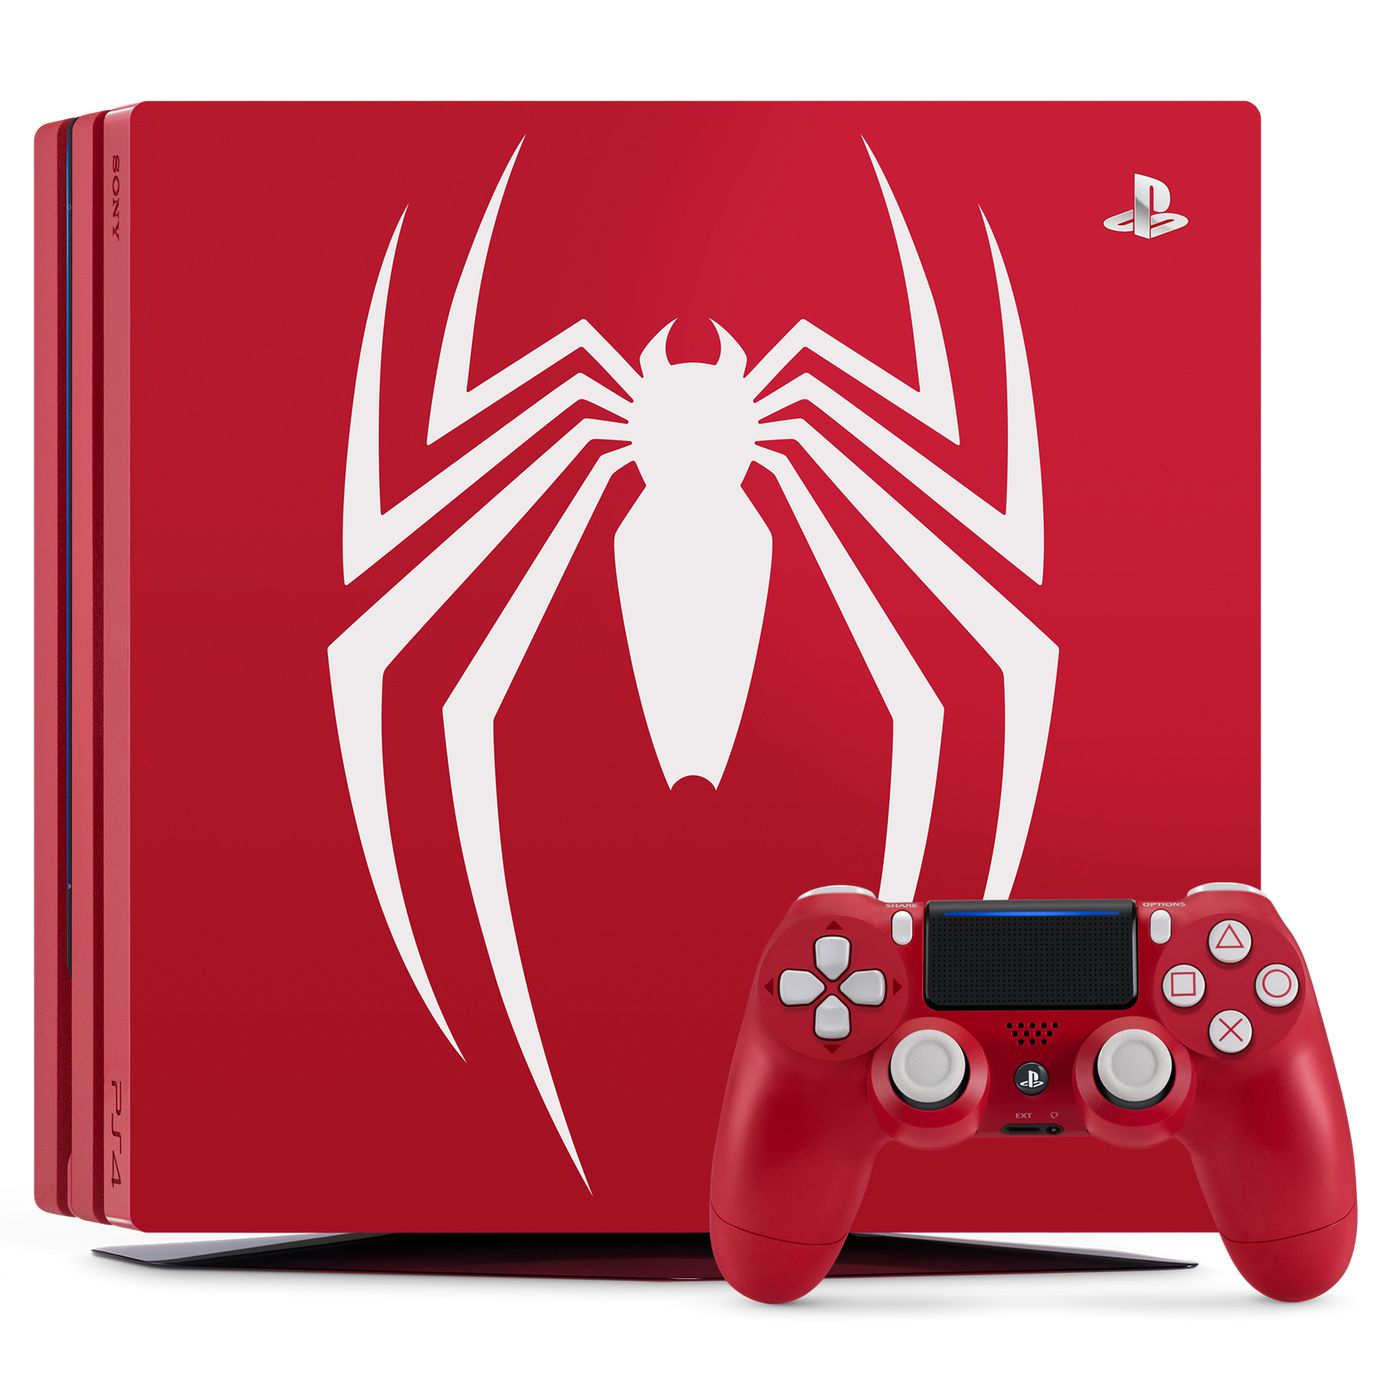 Playstation 4 Pro 1TB System: Spider-Man Limited Edition Red Console (Playstation 4)